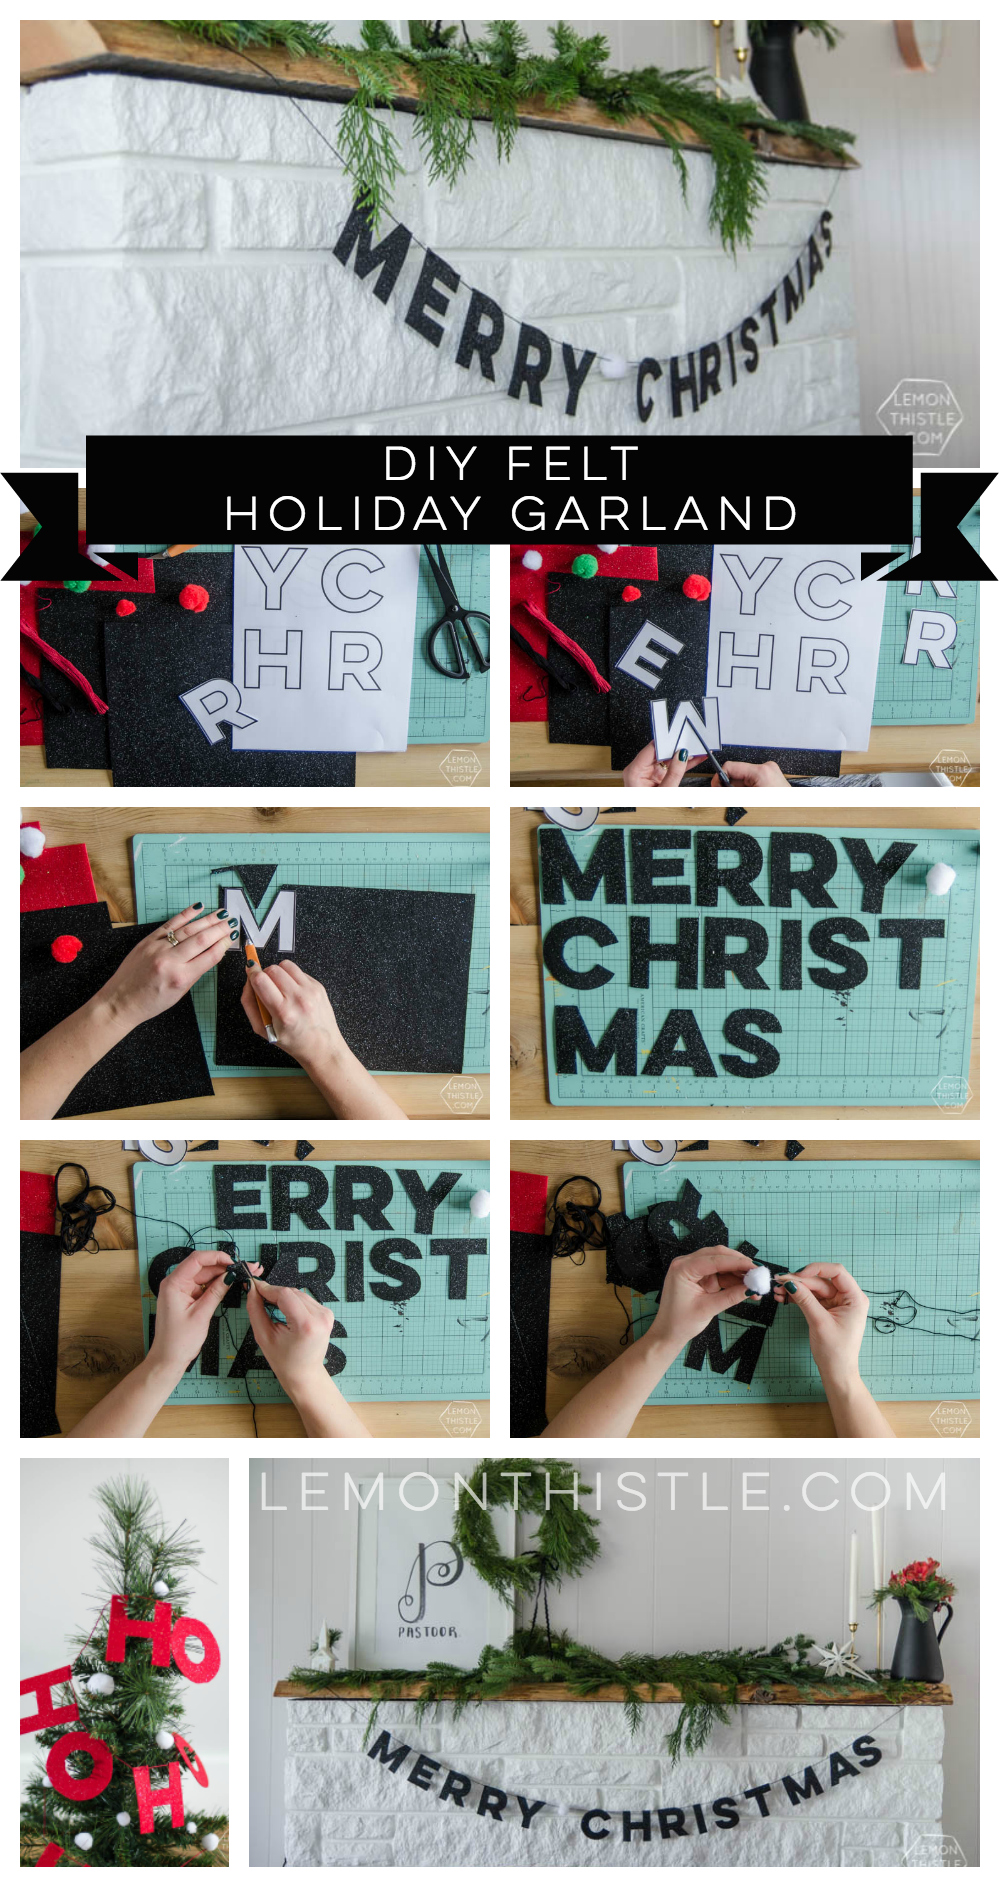 I love this DIY Christmas garland! The modern felt letters are perfect- and the pom pom is a cute detail!